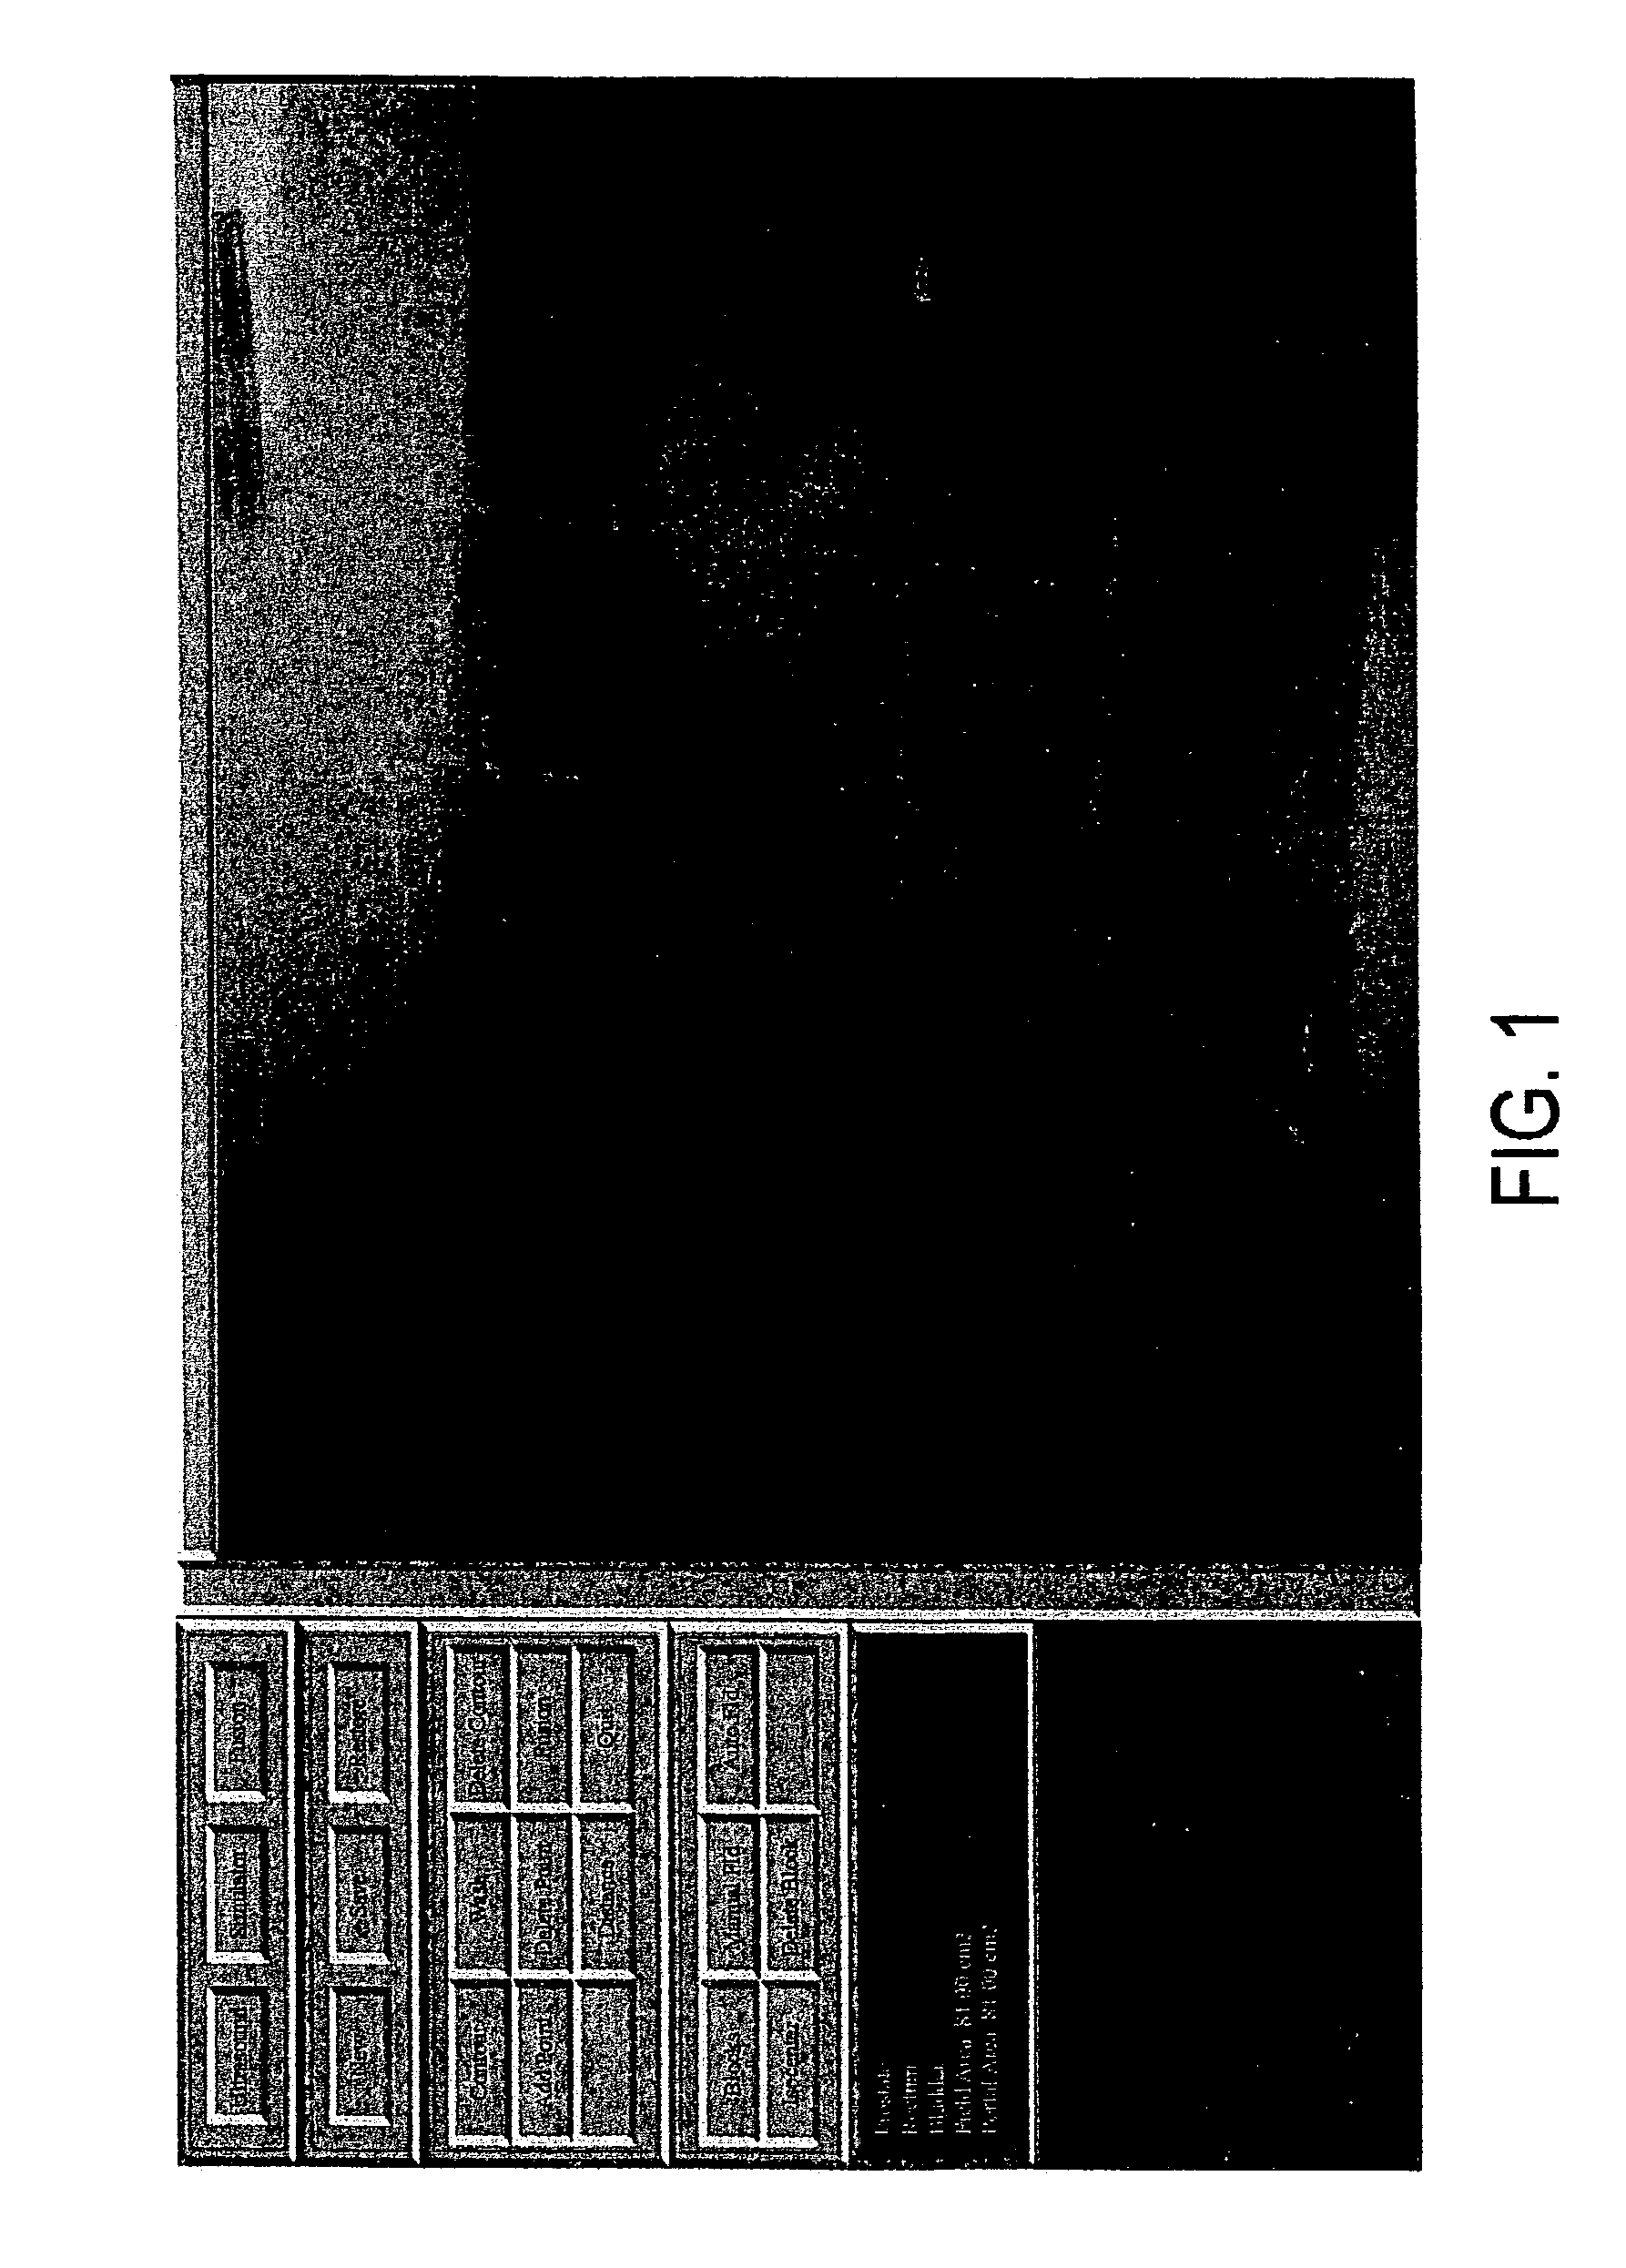 Apparatus and method for registration, guidance and targeting of external beam radiation therapy